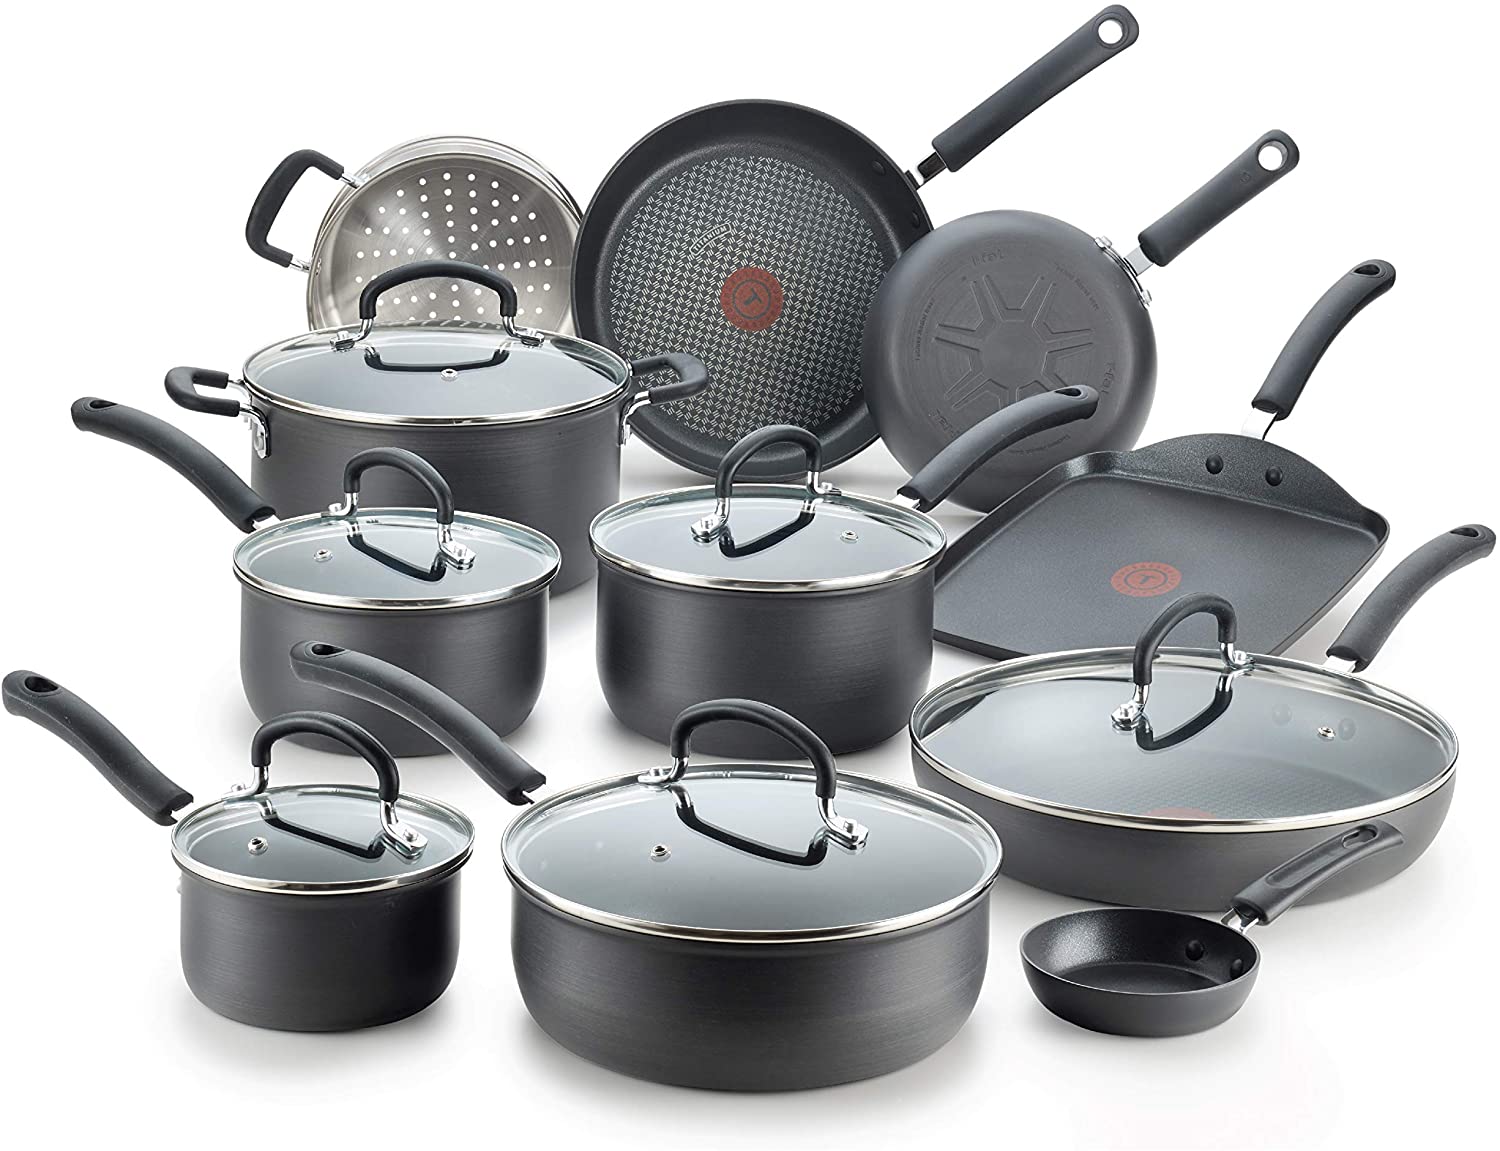 T-fal Ultimate Hard Anodized Nonstick 17-Piece Cookware Set